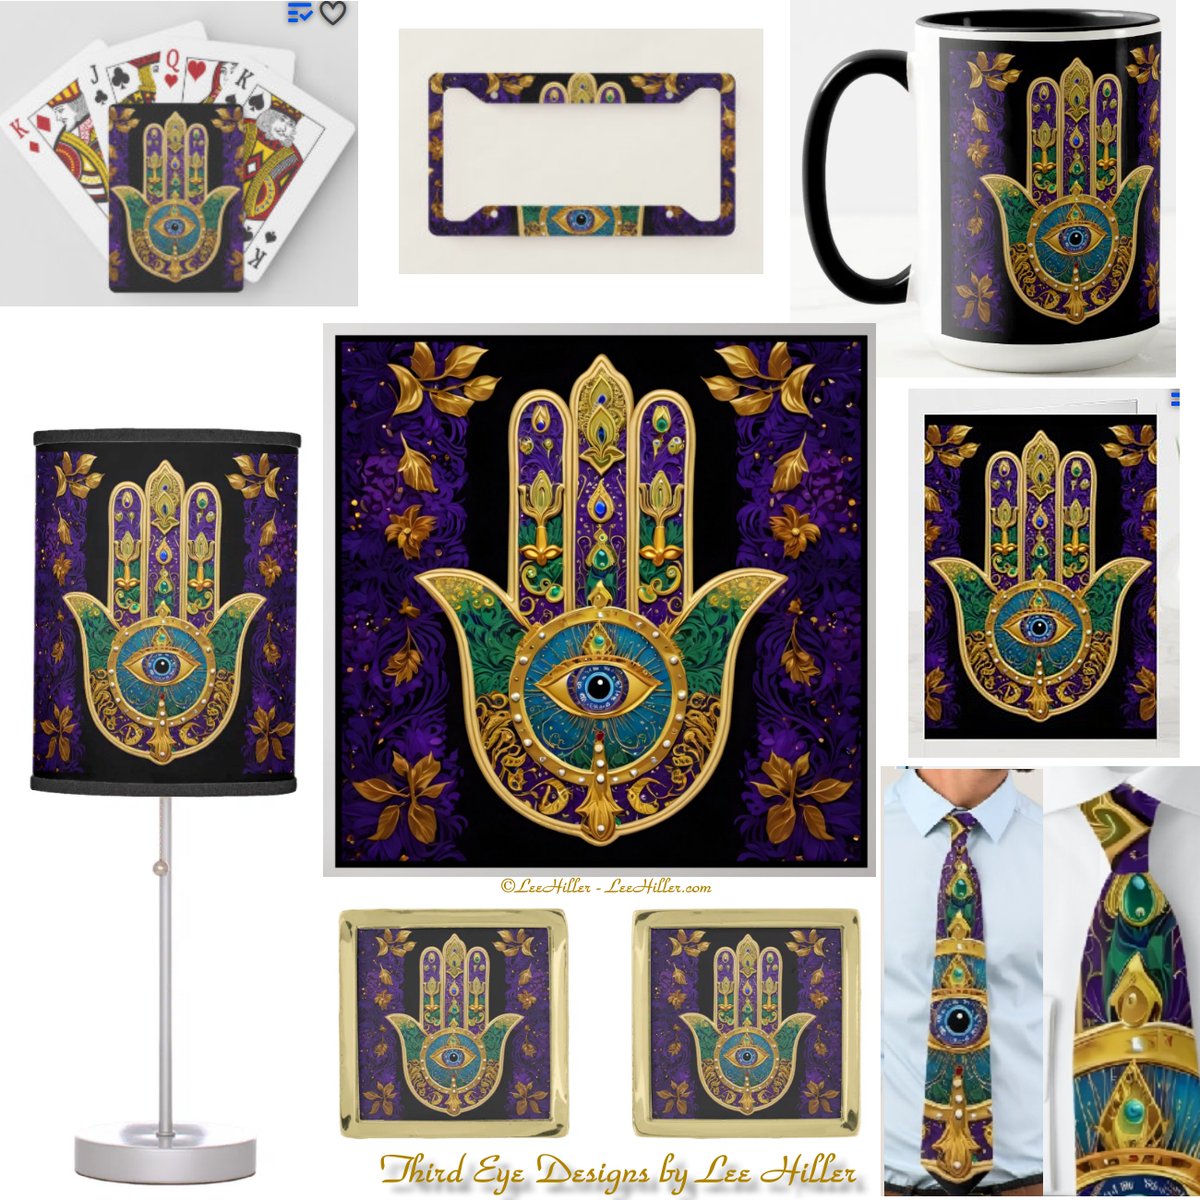 💚💎💜✨🪬✨💜💎💚 
The #Hamsa symbolizes protection, blessings, & the ability to ward off evil. It is believed to bring good fortune, happiness, & prosperity to those who wear or display it. 
#gifts #aprons #mugs #lamps #ties #cufflinks #homedecorations

bit.ly/MardiGrasHamsa